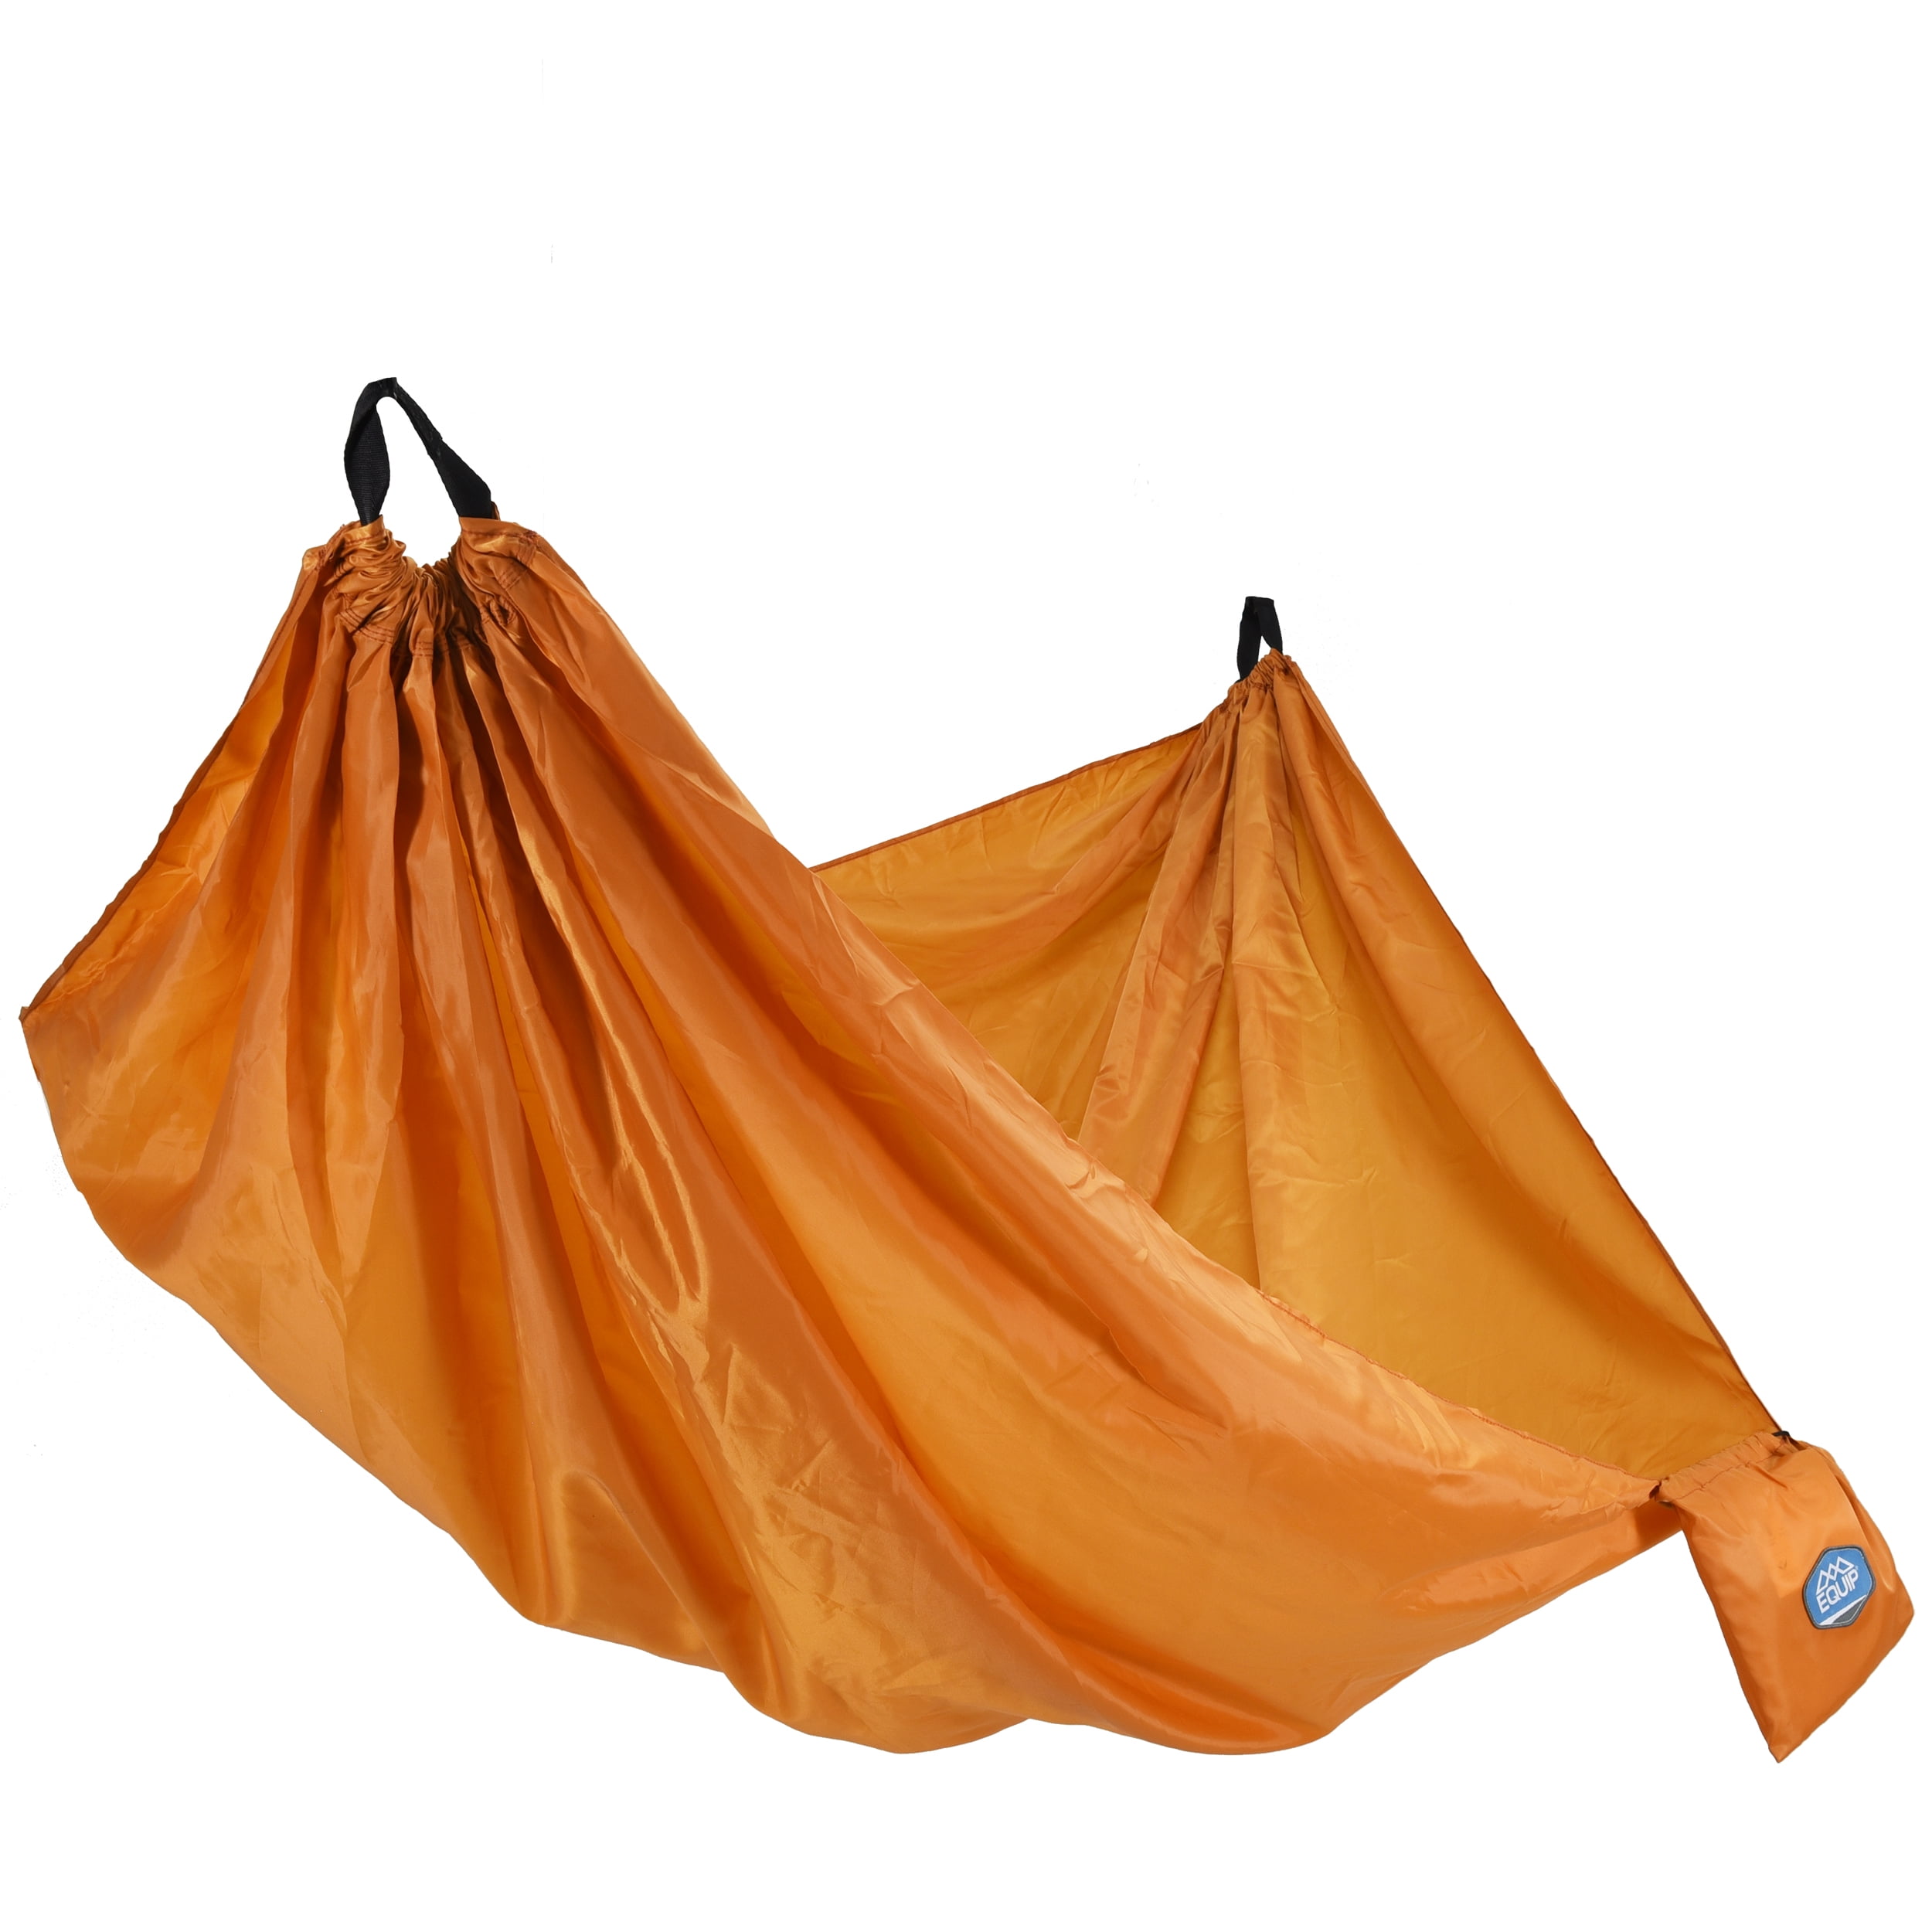 Equip Recycled Polyester Portable Camping Travel Hammock, 1Person Turmeric Yellow, Size 108" L x 56" W